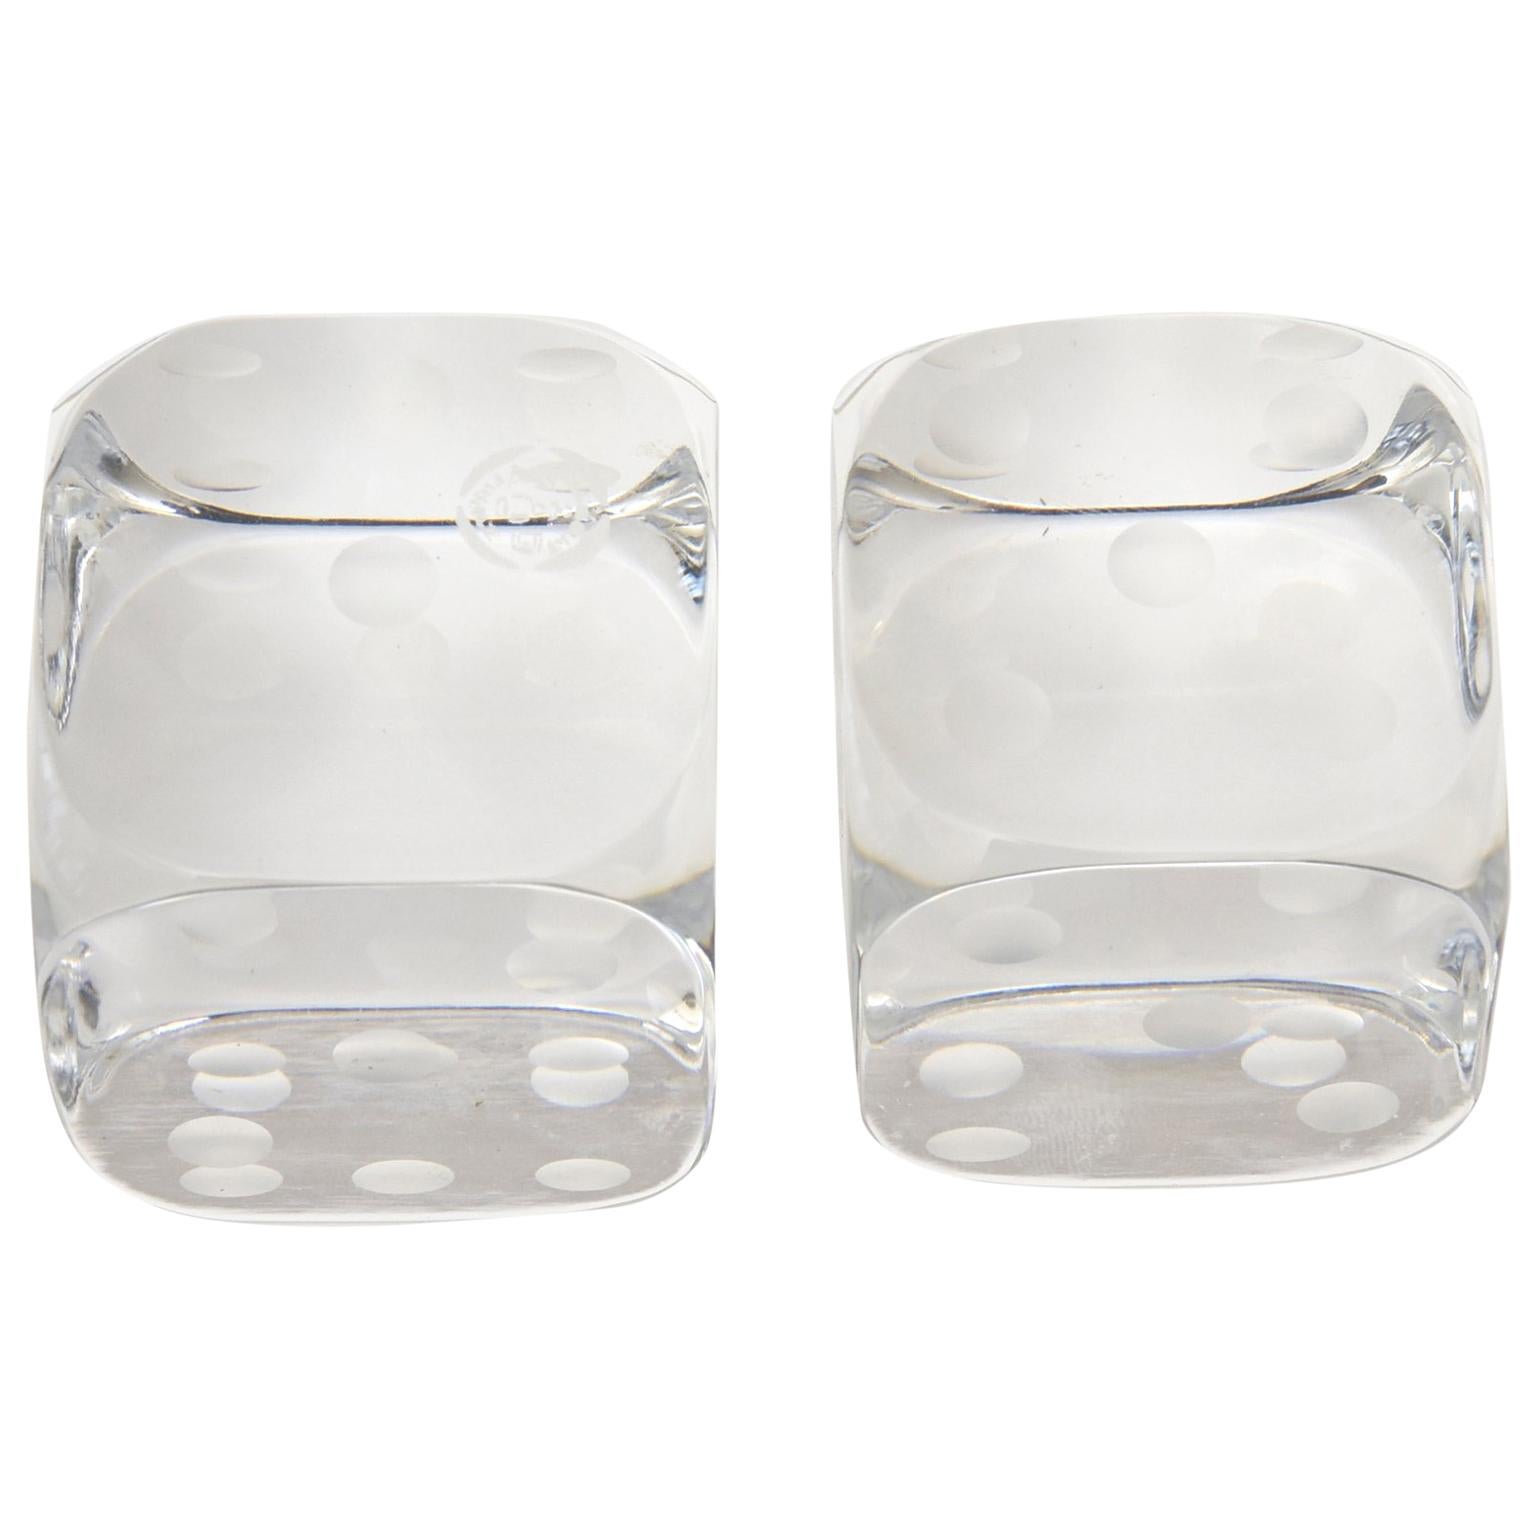 Pair of Vintage Square Baccarat Signed Crystal Dice / Desk Accessory